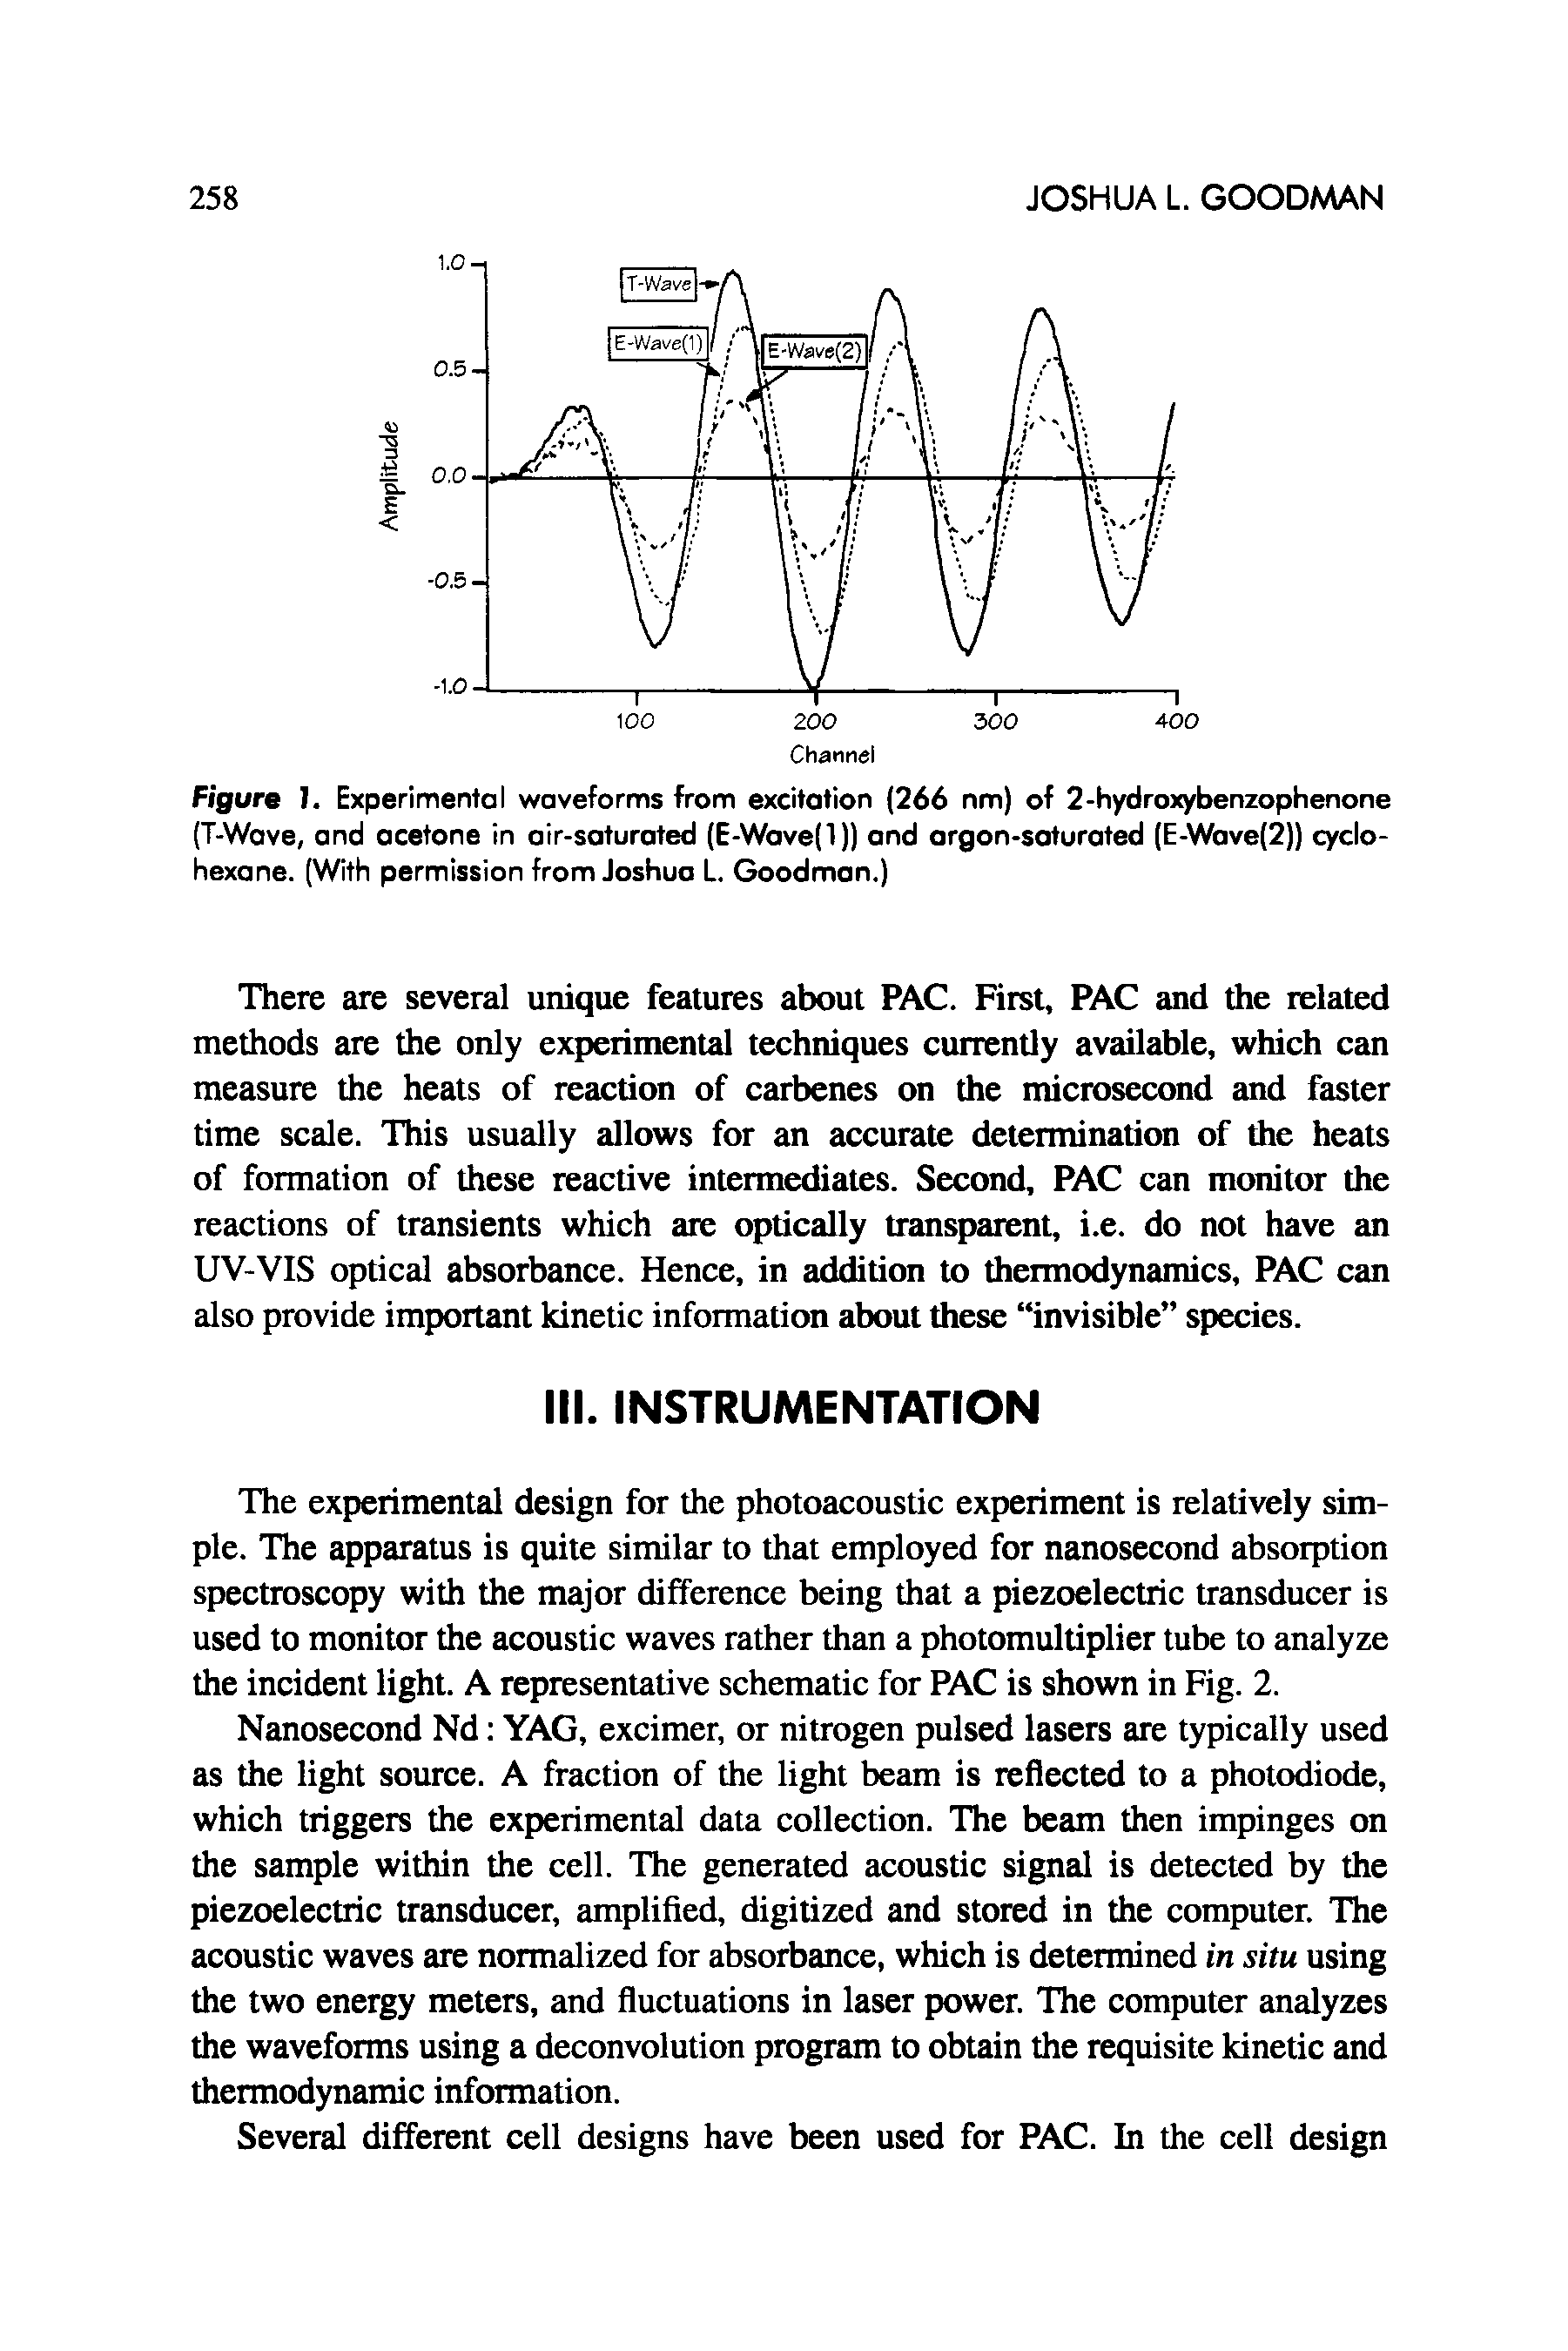 Figure 1. Experimental waveforms from excitation (266 nm) of 2-hydroxybenzophenone (T-Wave, and acetone in air-saturated (E-Wave(l)) and argon-saturated (E-Wave(2)) cyclohexane. (With permission from Joshua L. Goodman.)...